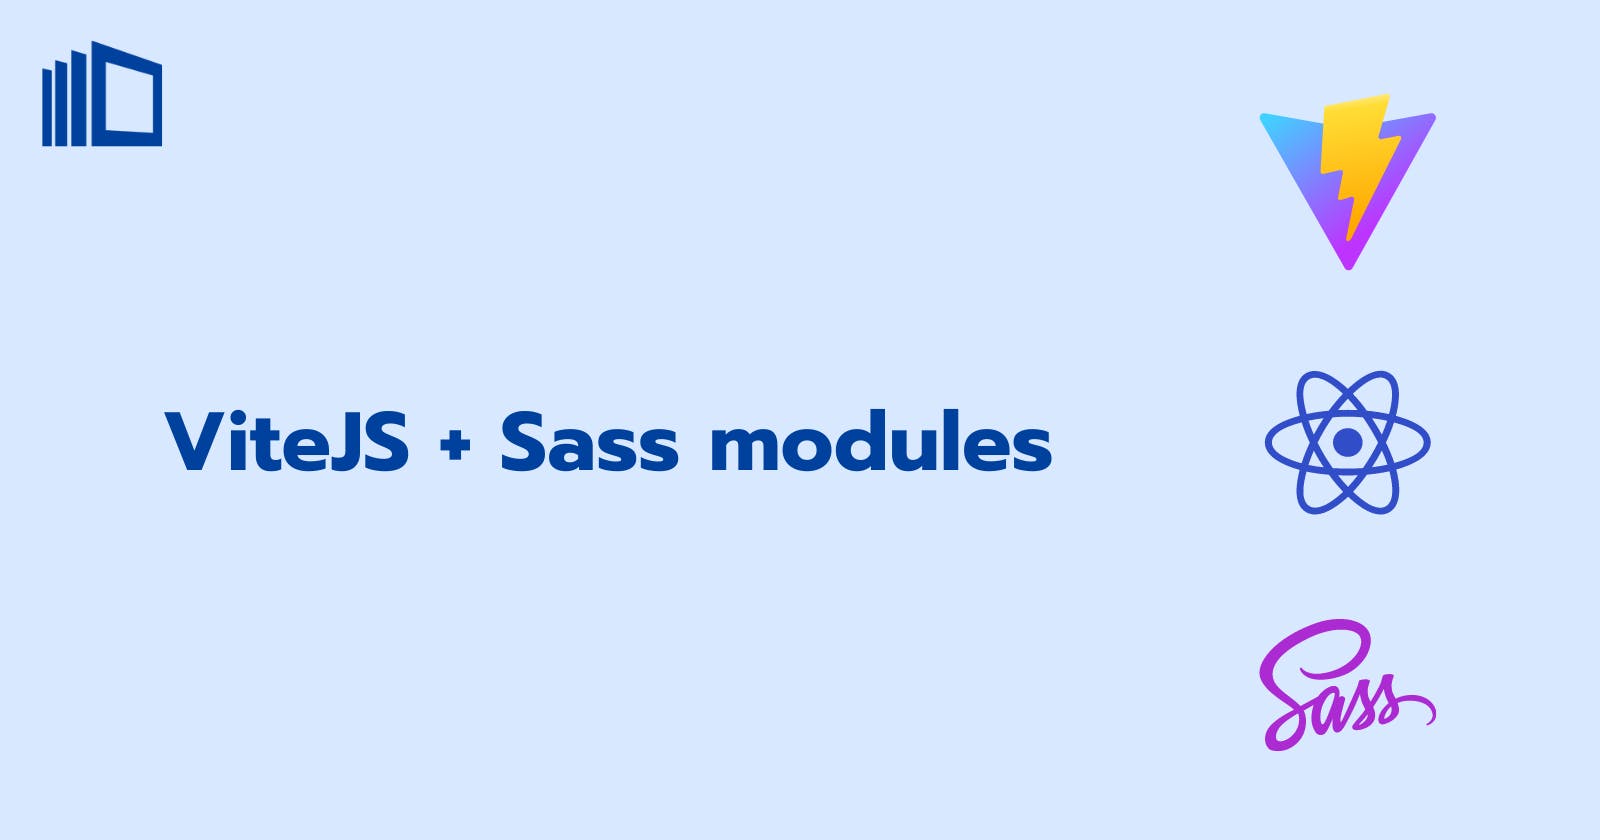 Use Sass modules in a React project